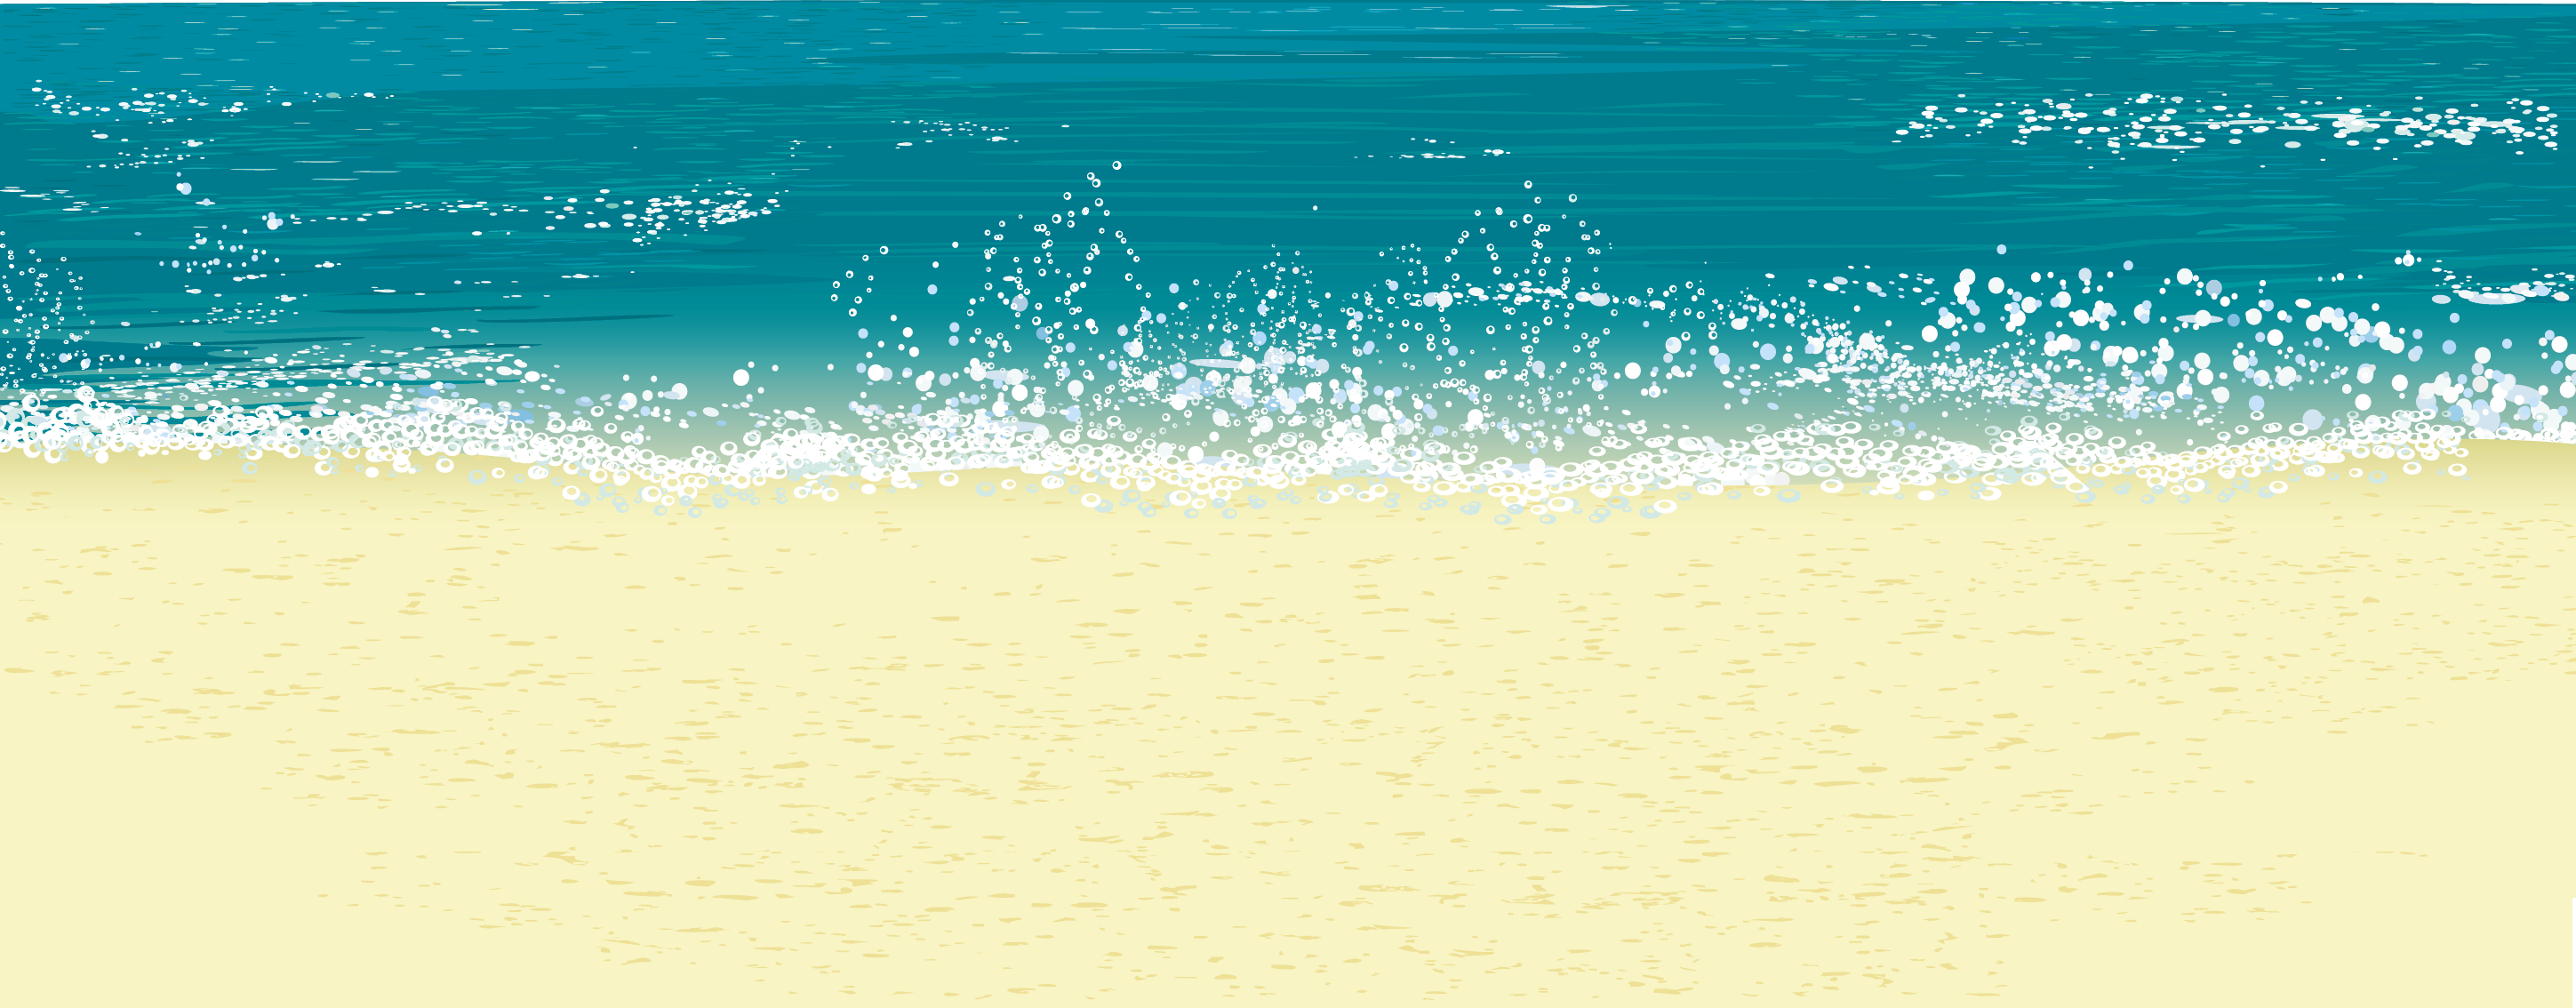 free clipart of the beach - photo #13